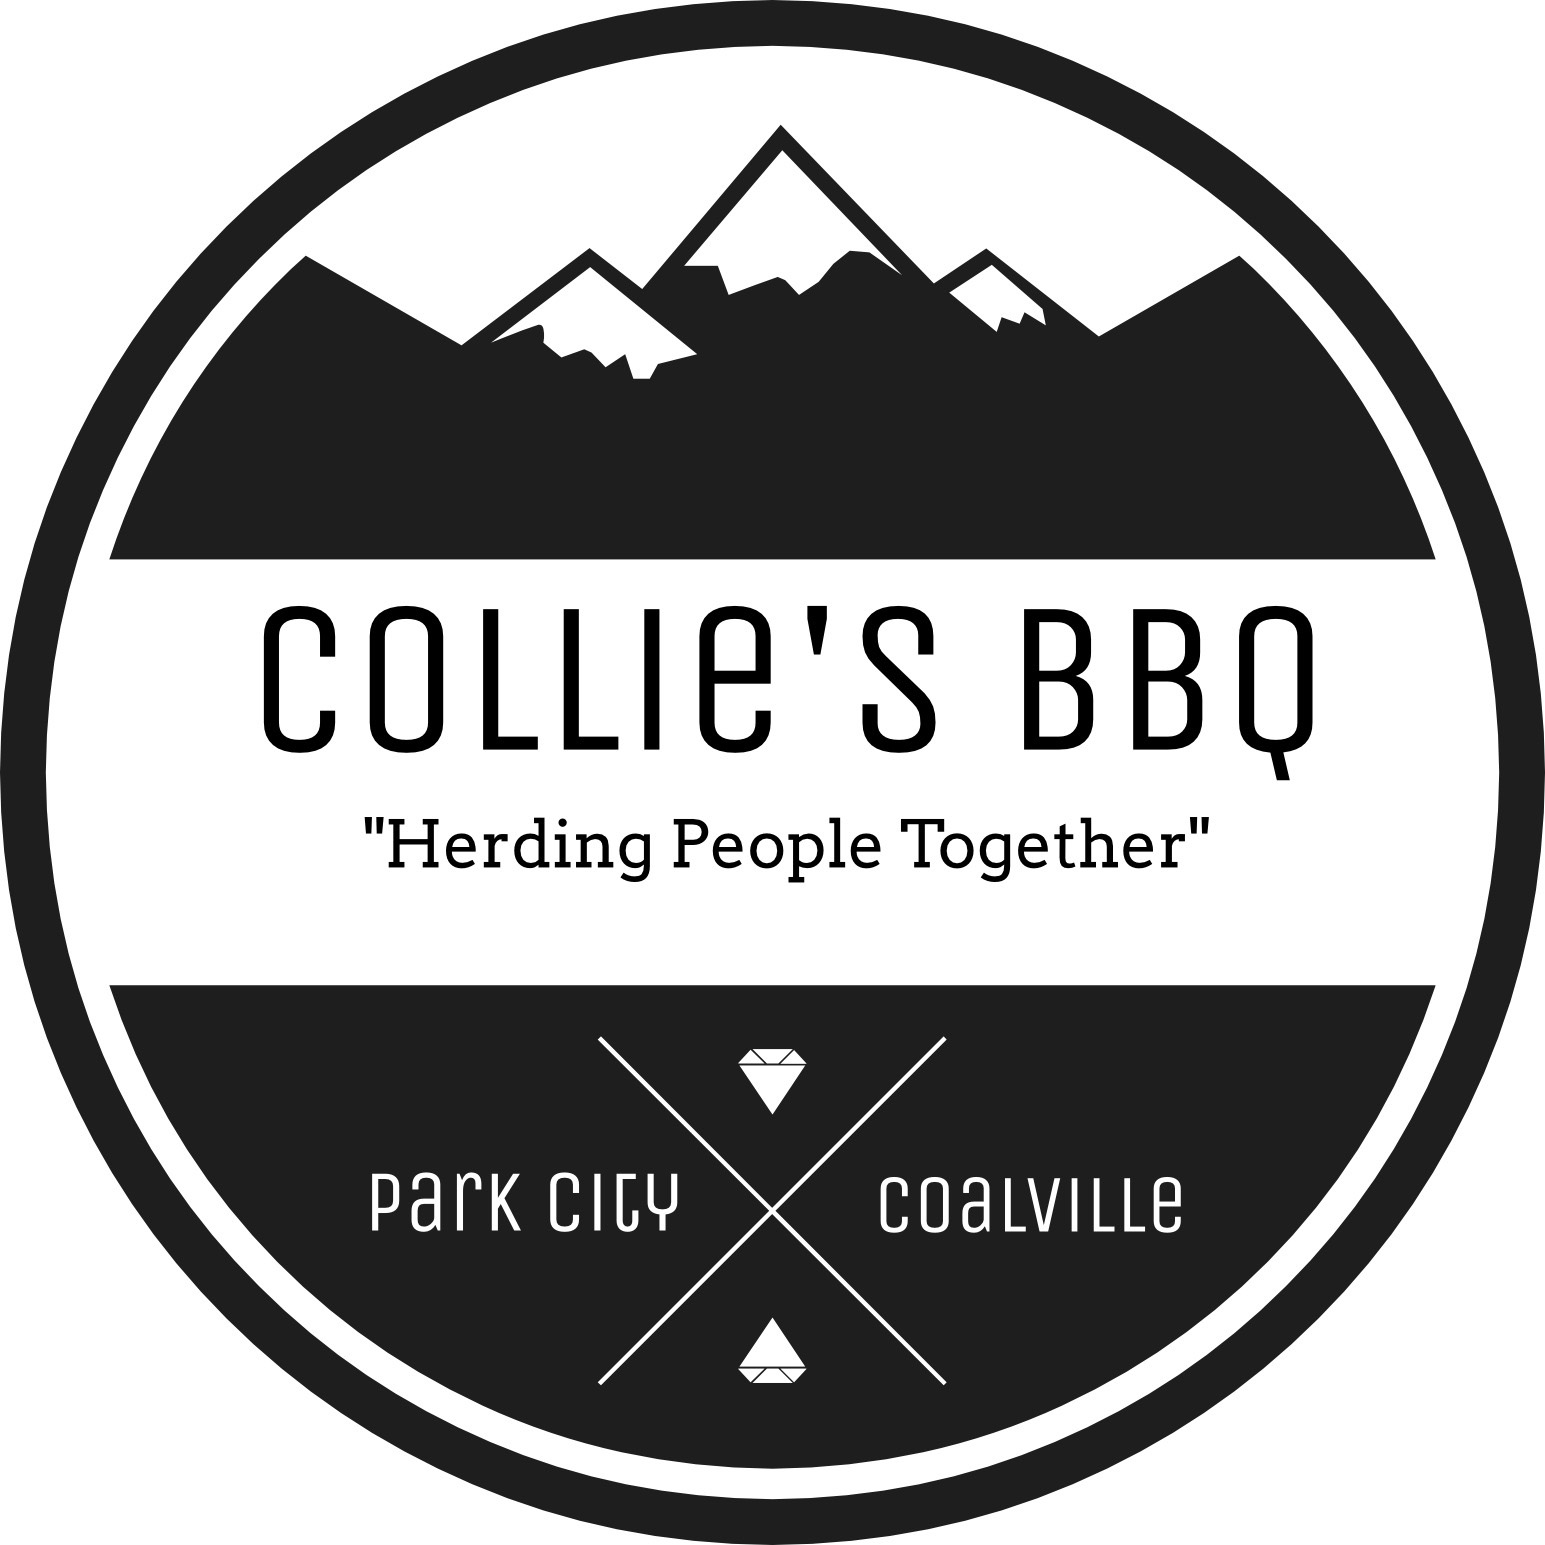 Collie’s Bar and Grill